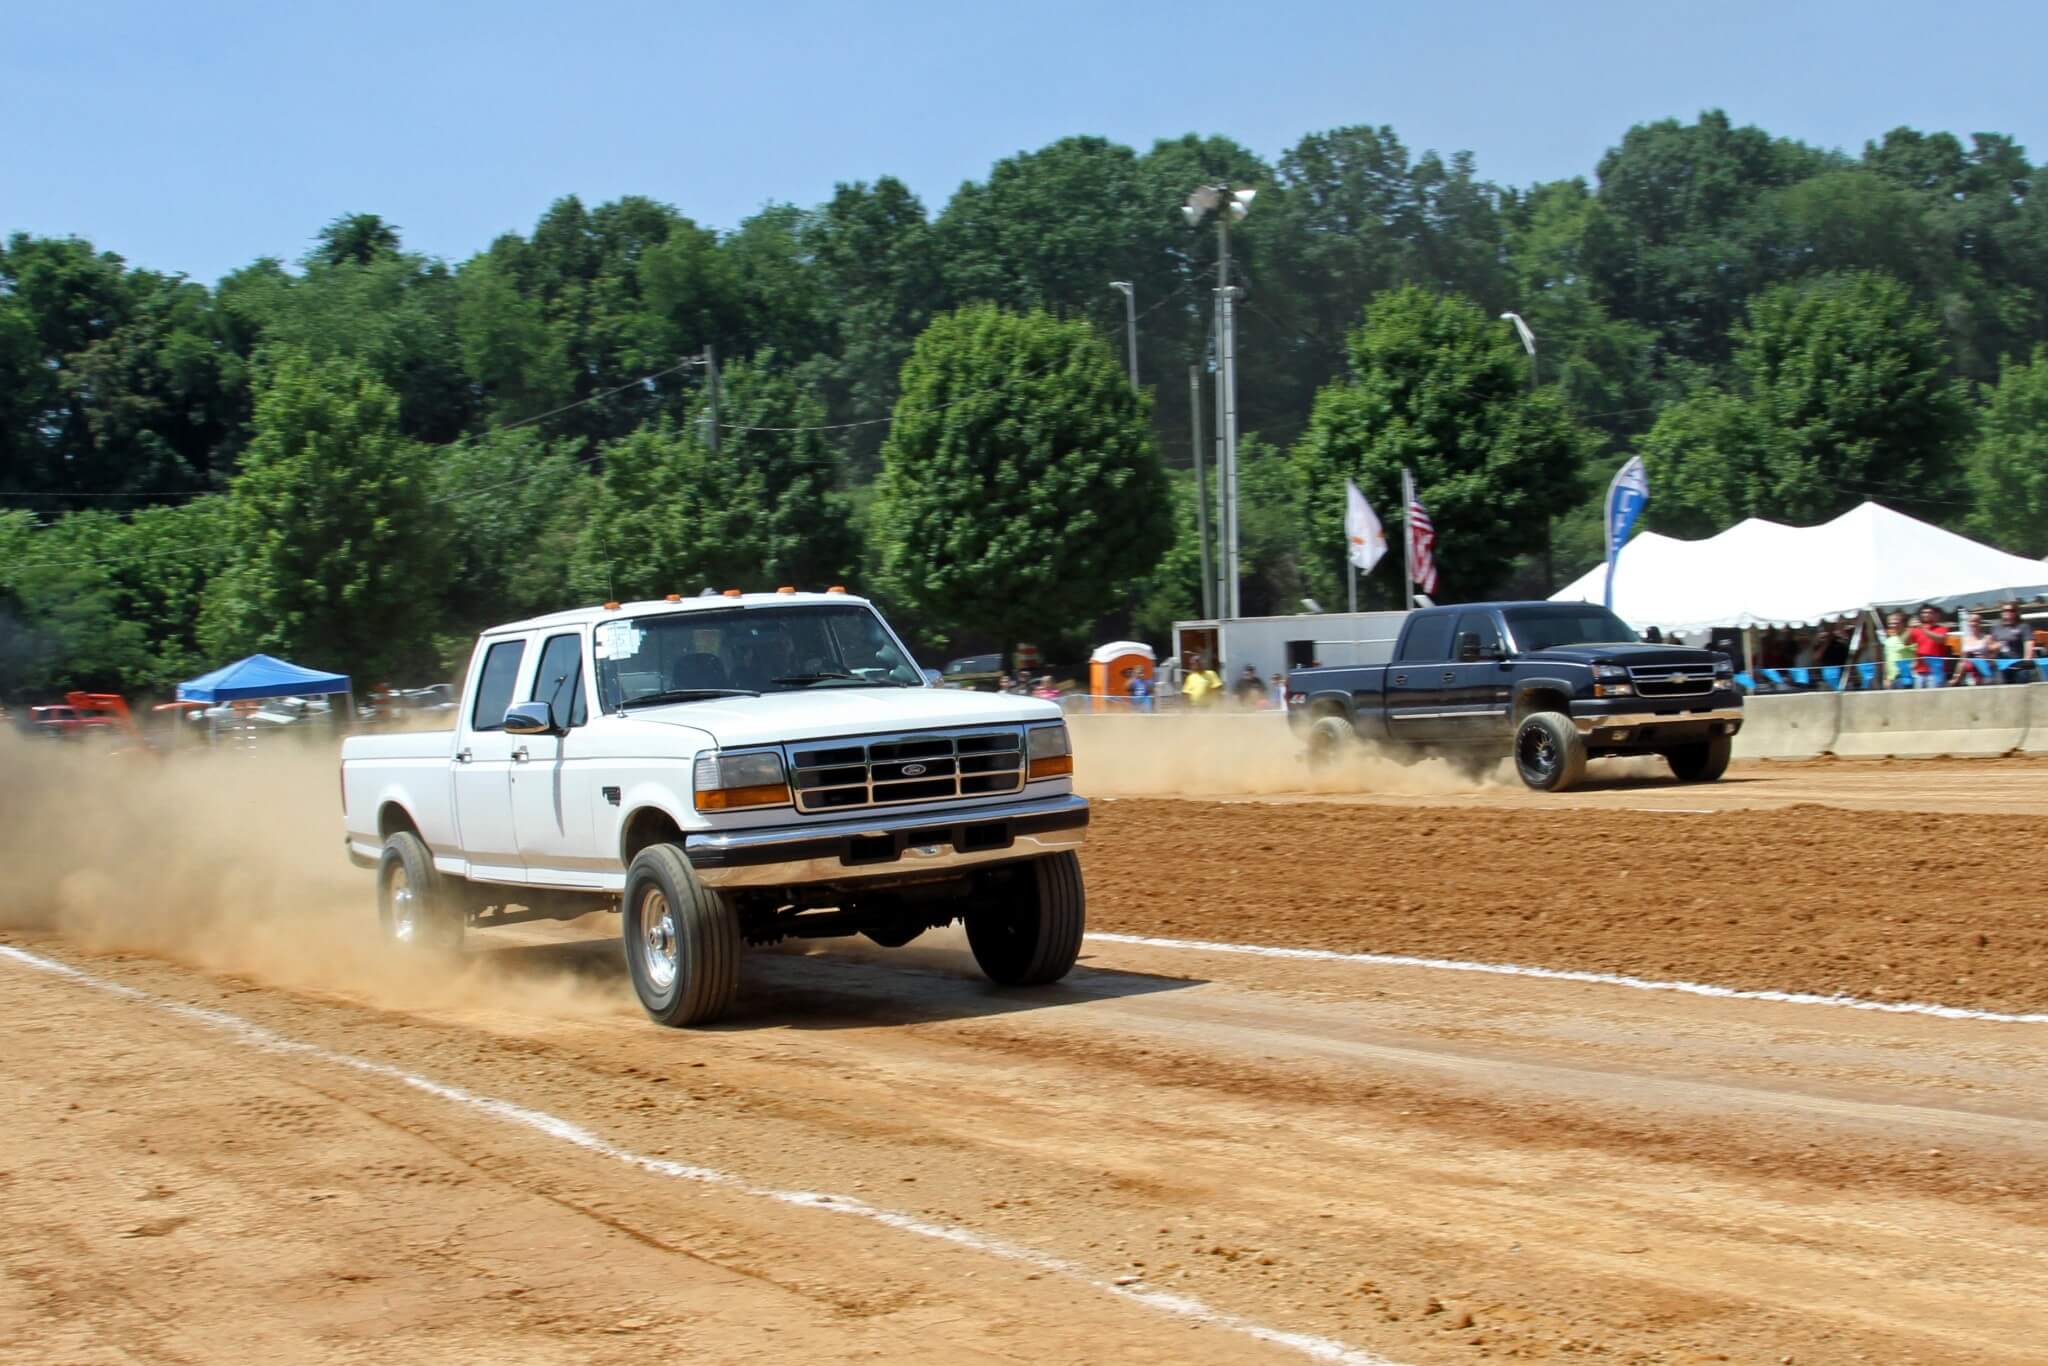 Matt Maier drove his white OBS Ford to win after win, including the final round win over Brad Lilly and his Chevy seen here.